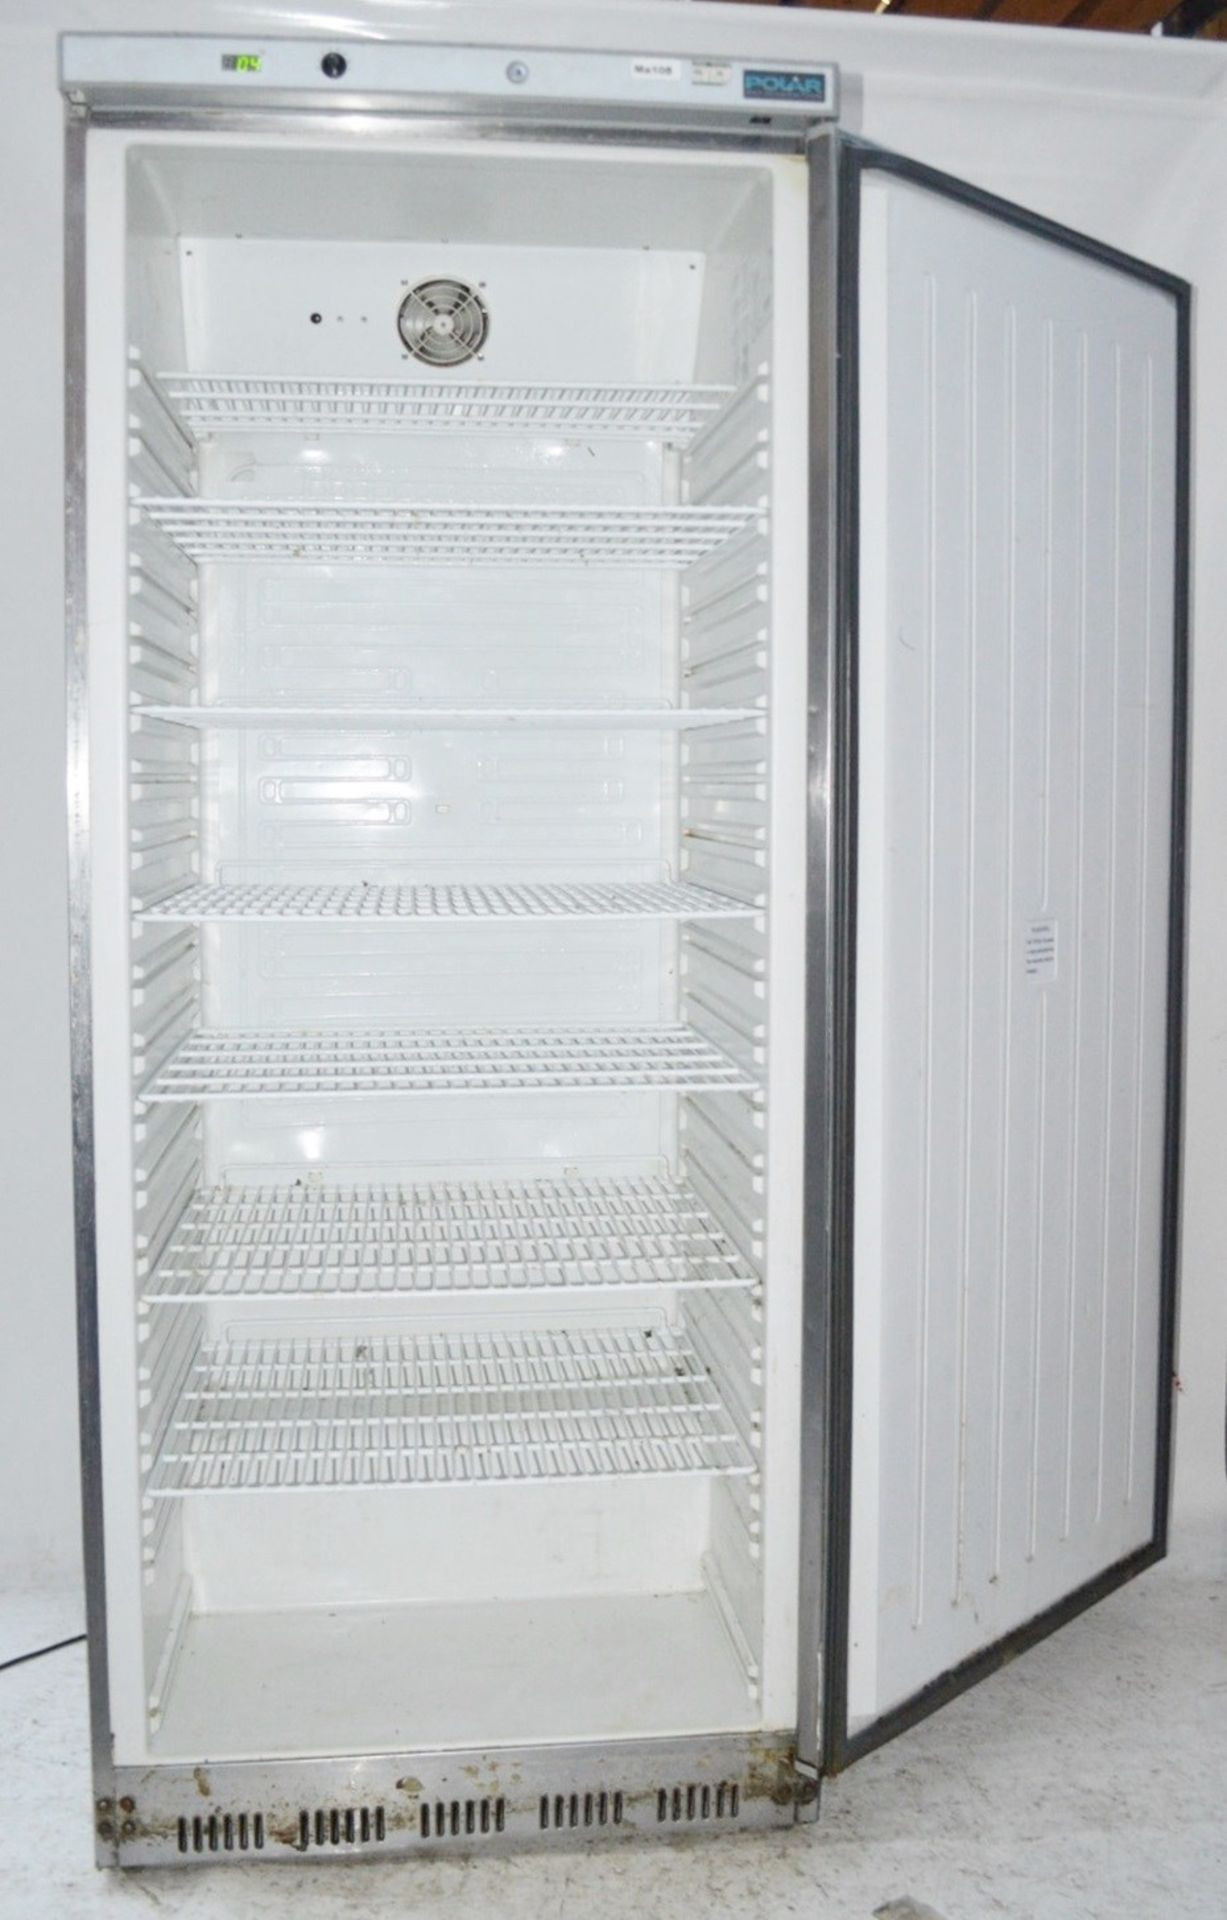 1 X POLAR CD084 600 LTR SINGLE DOOR UPRIGHT FRIDGE - RECENTLY REMOVED FROM A - Image 2 of 7